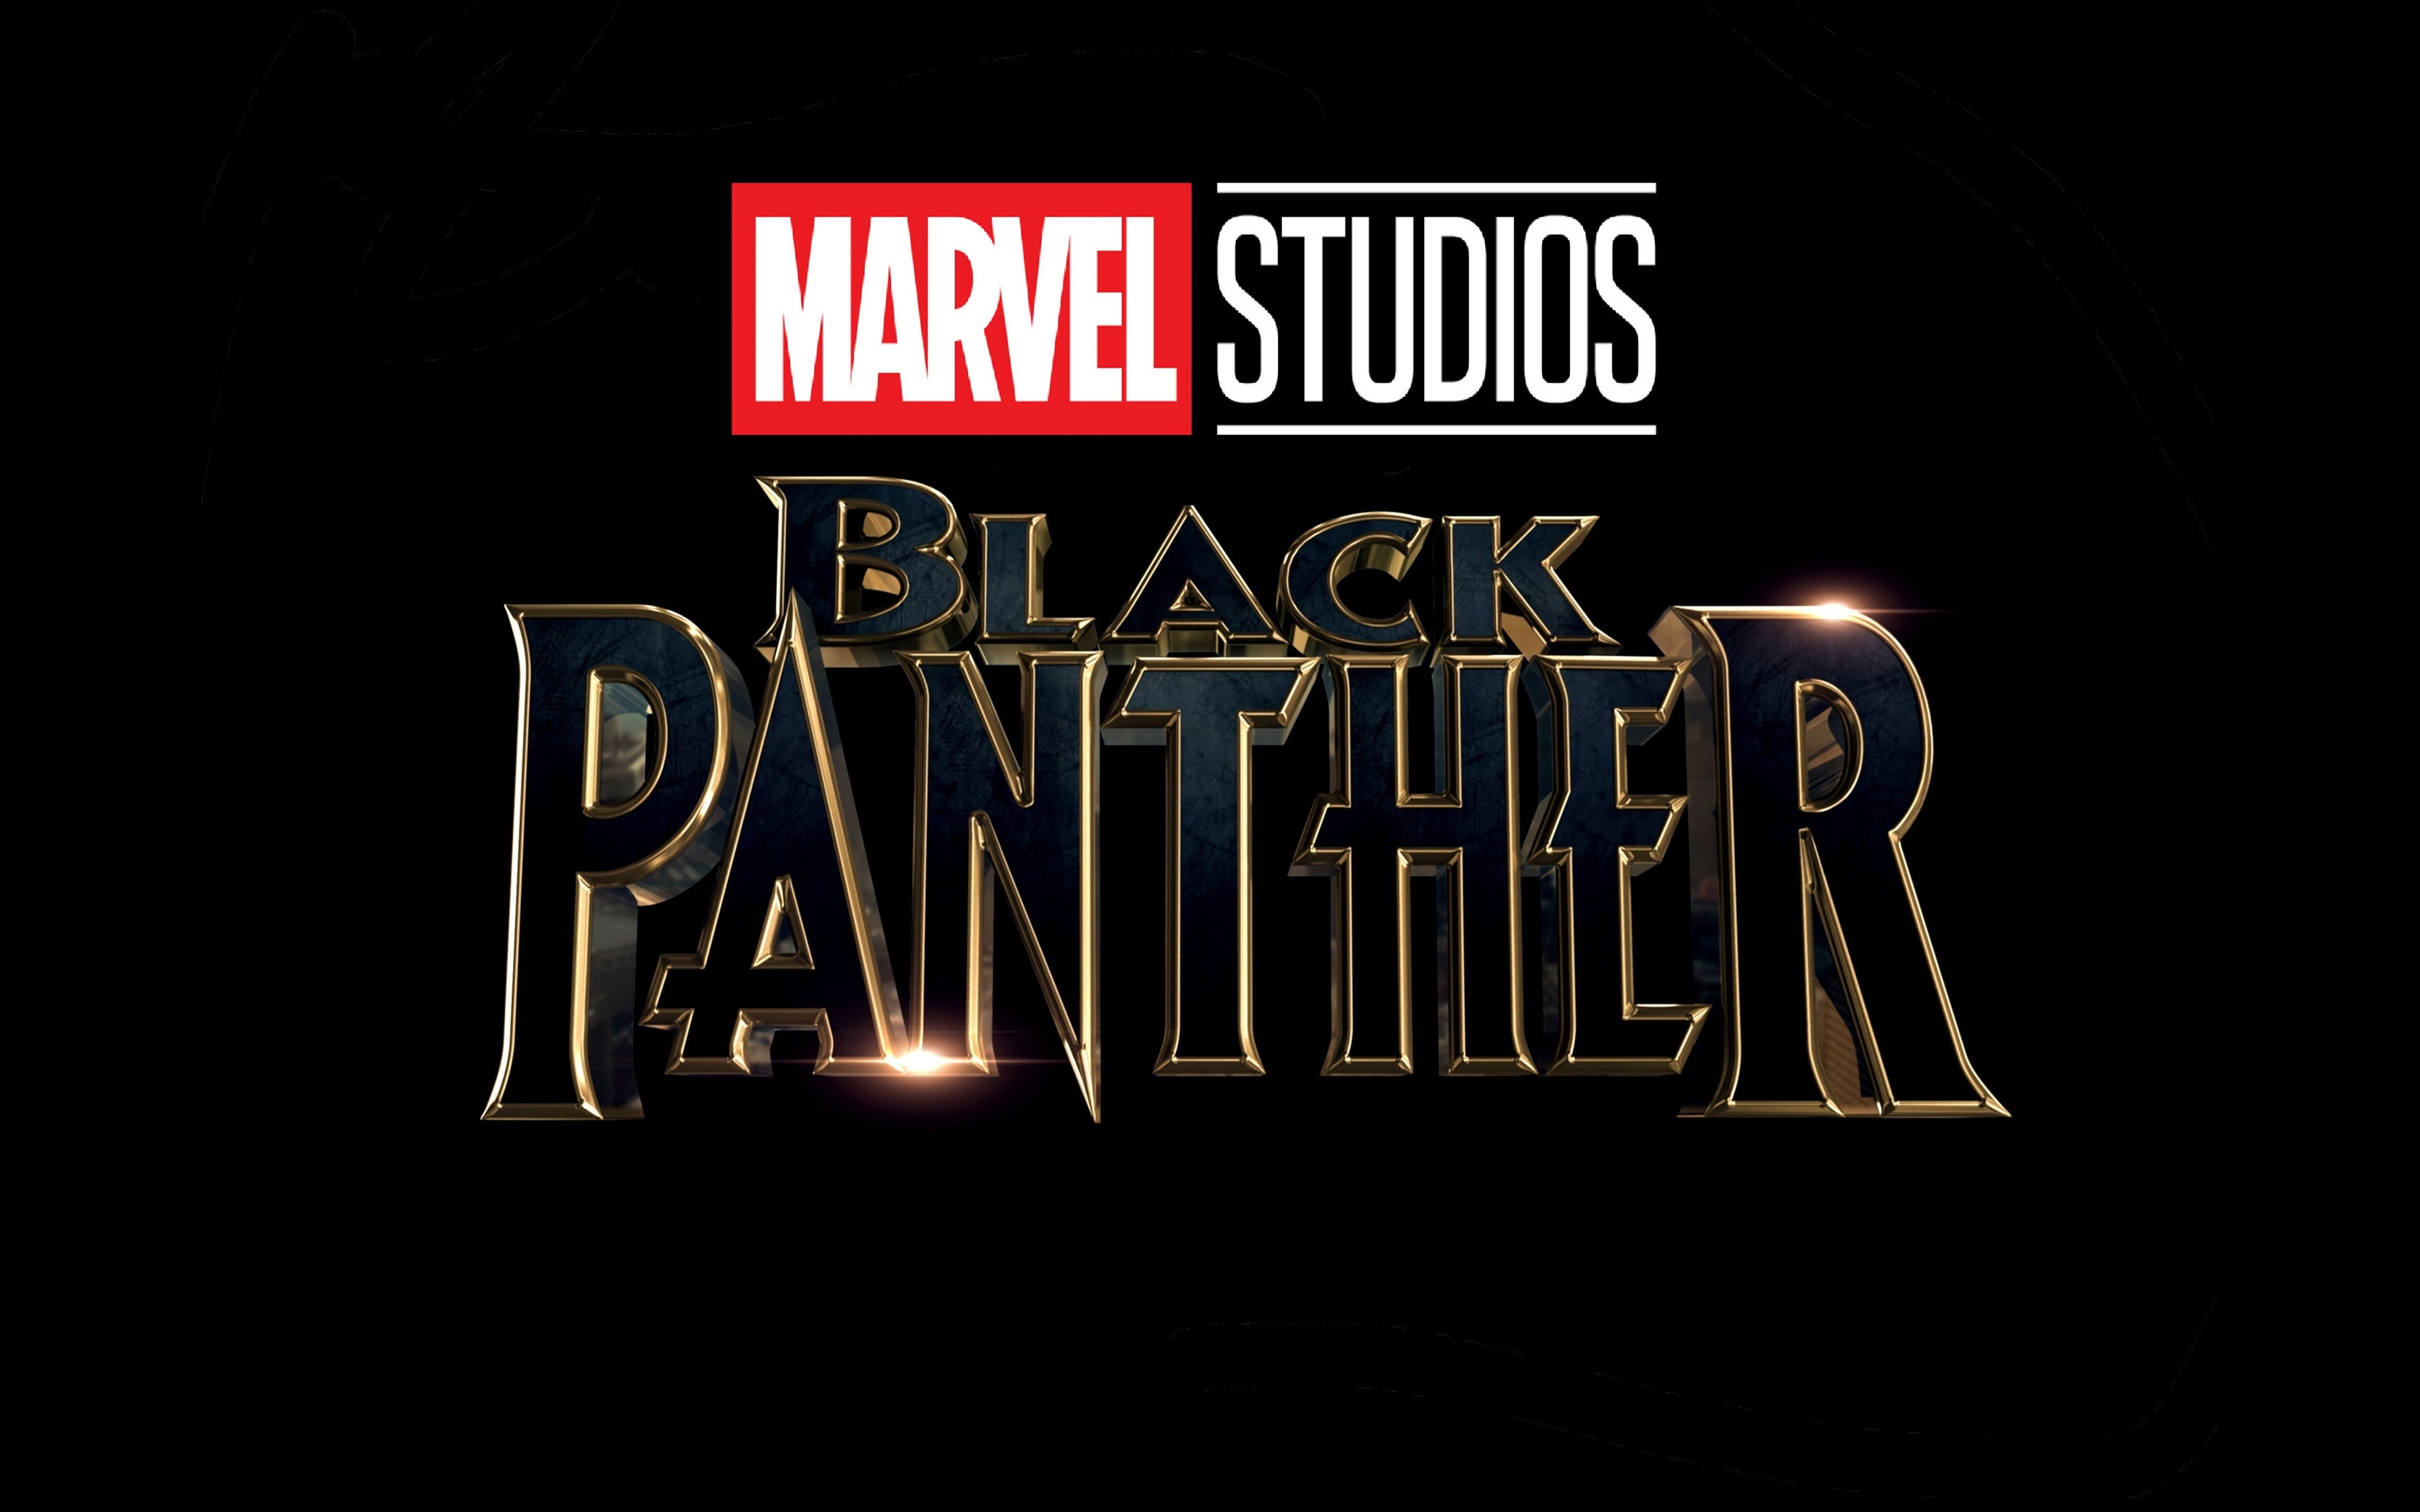 The Black Panther 2018 Movie Poster for 3840 x 2400 4K Retina Display resolution